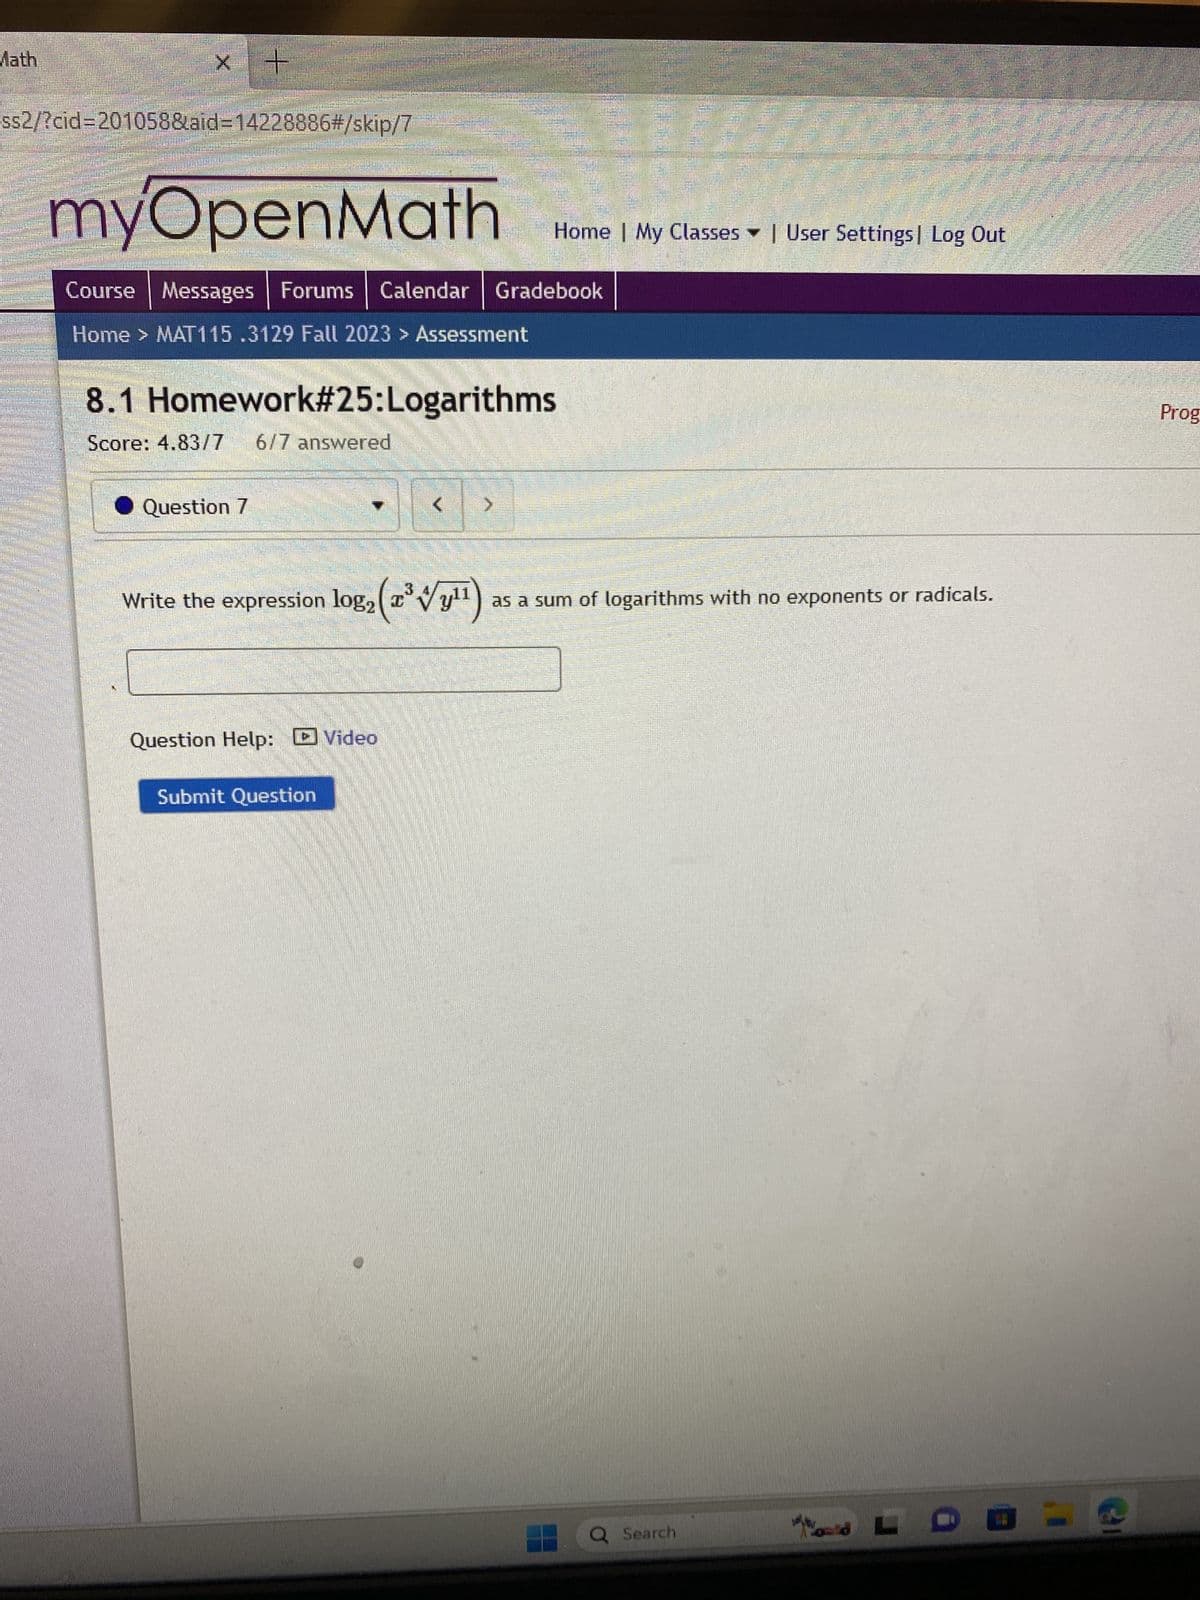 Math
x +
ss2/?cid=201058&aid=14228886#/skip/7
myOpenMath
|
Course Messages Forums Calendar | Gradebook
Home > MAT115.3129 Fall 2023 > Assessment
8.1 Homework#25:Logarithms
Score: 4.83/7 6/7 answered
Question 7
Home | My Classes User Settings Log Out
11
Write the expression log₂ (z³y¹¹) as a sum of logarithms with no exponents or radicals.
Question Help: Video
Submit Question
Q Search
LDEE
Prog